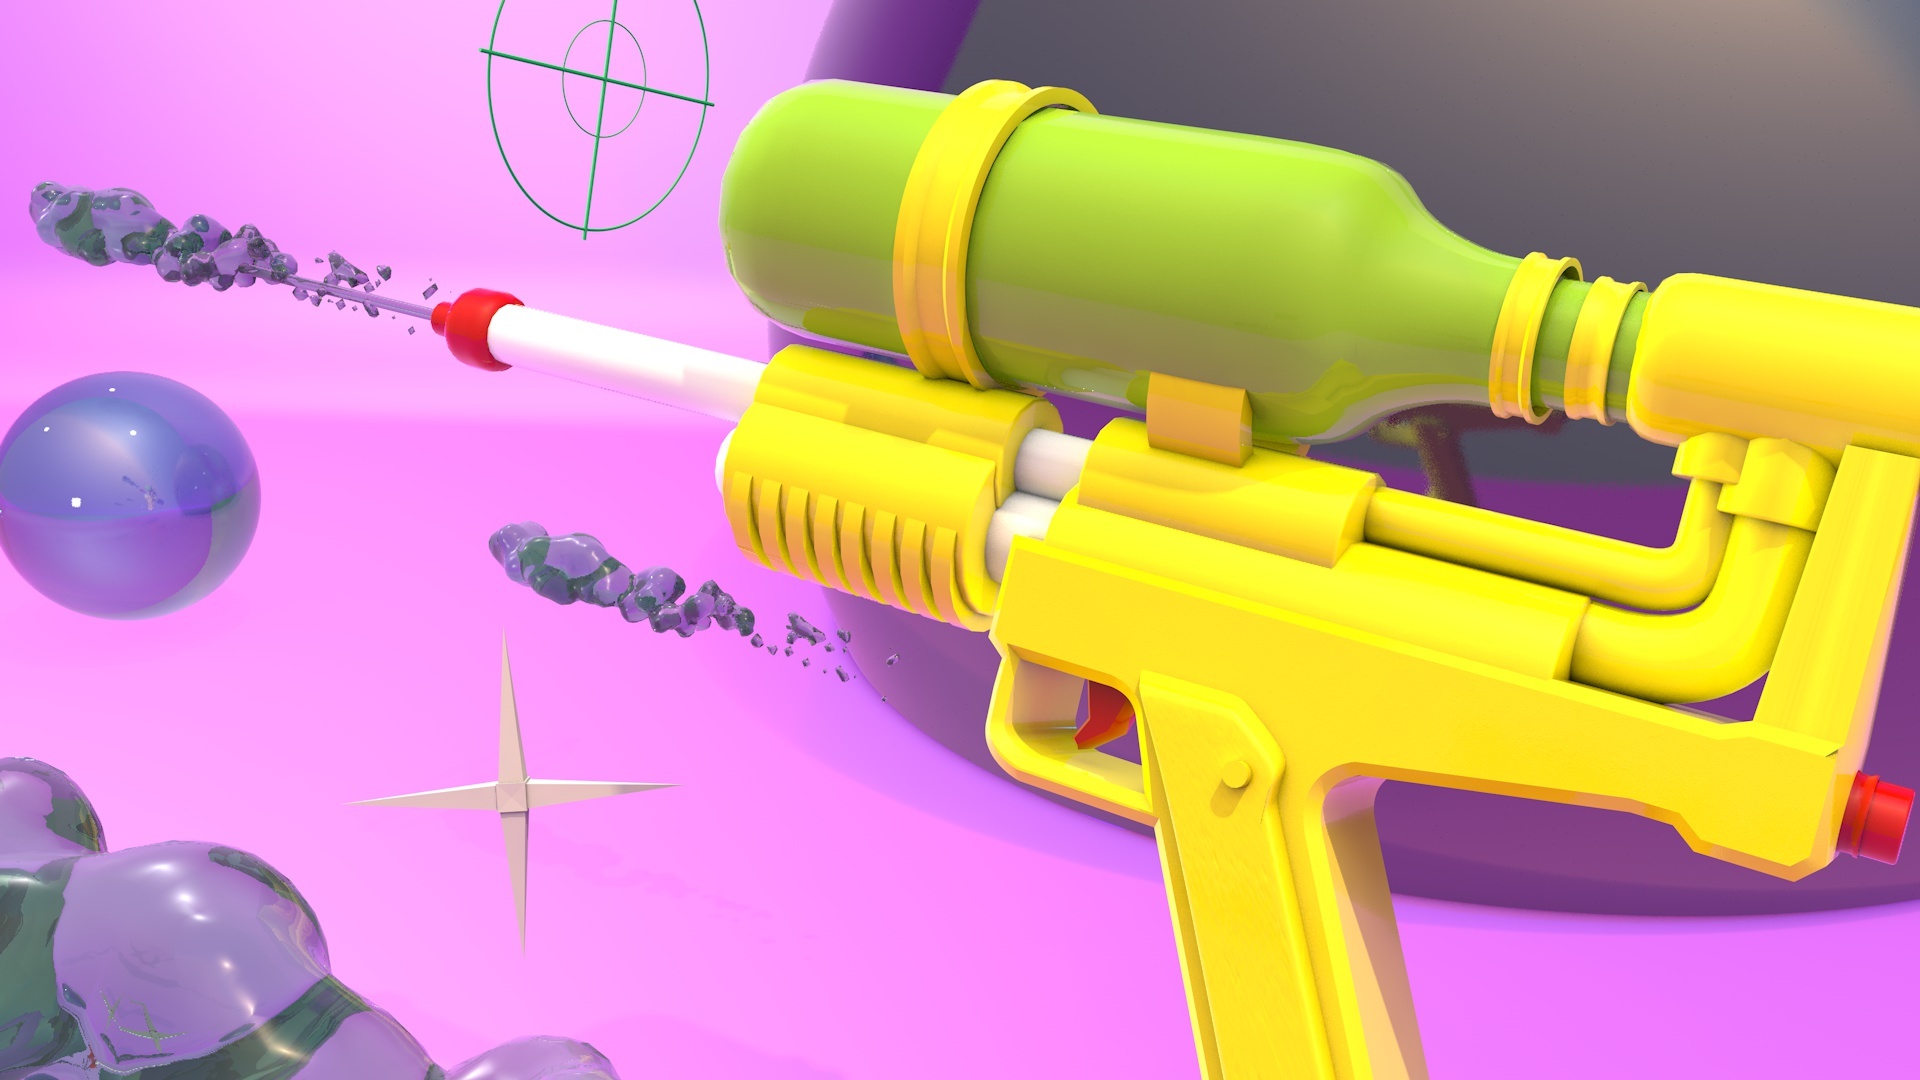 A water gun pointing at a target, ready for battle